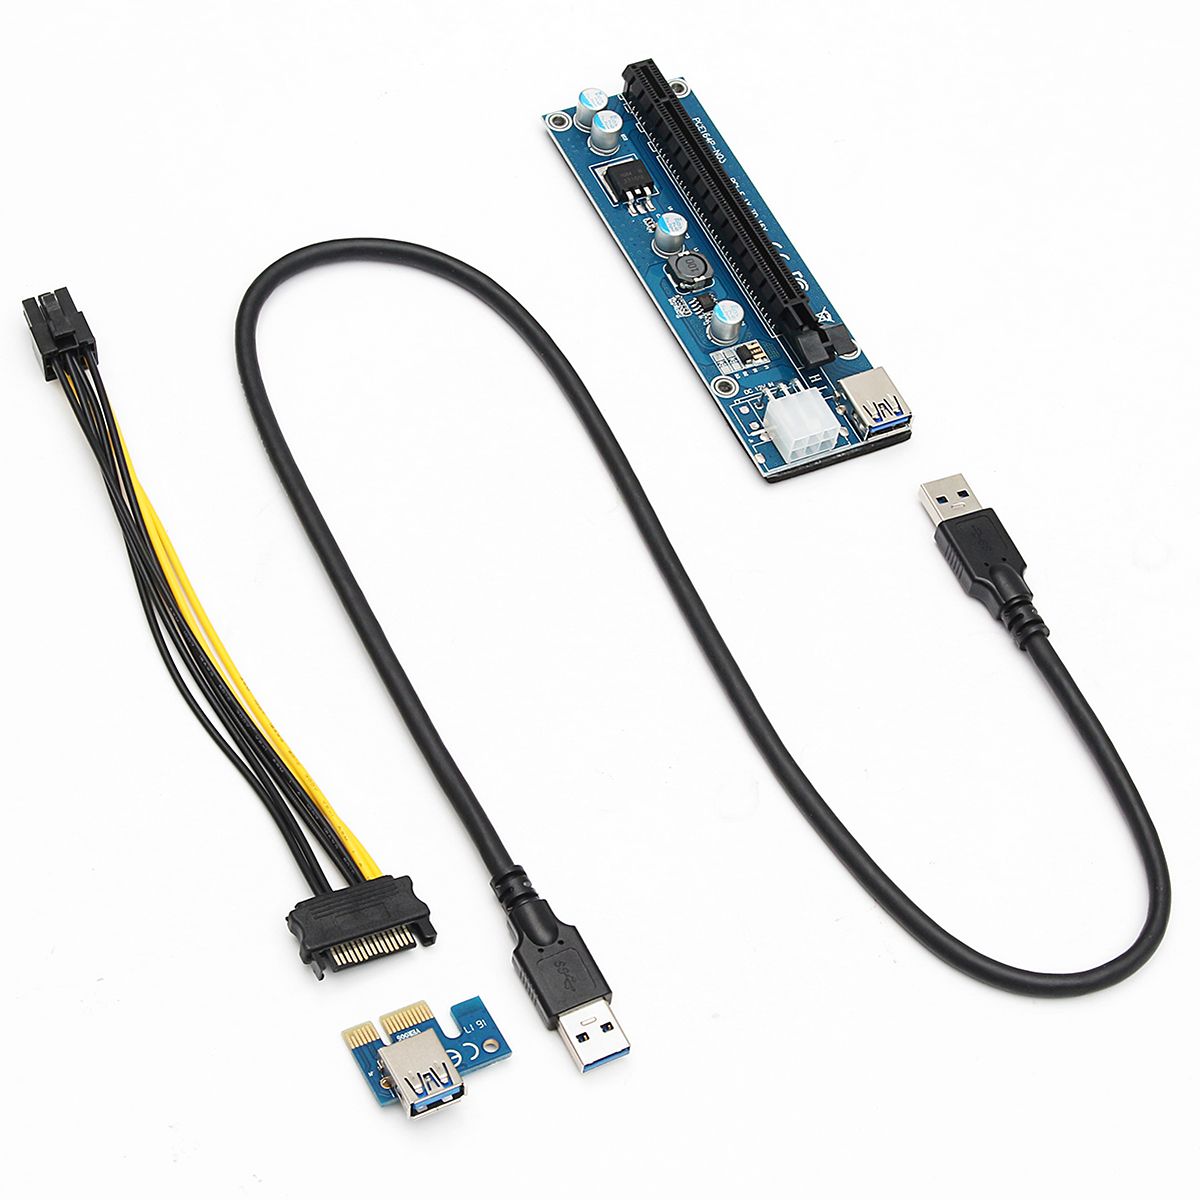 06m-USB30-PCI-E-1x-To16x-Extender-Riser-Card-Adapter-Extension-Power-Cable-For-ETH-GPU-Mining-1167988